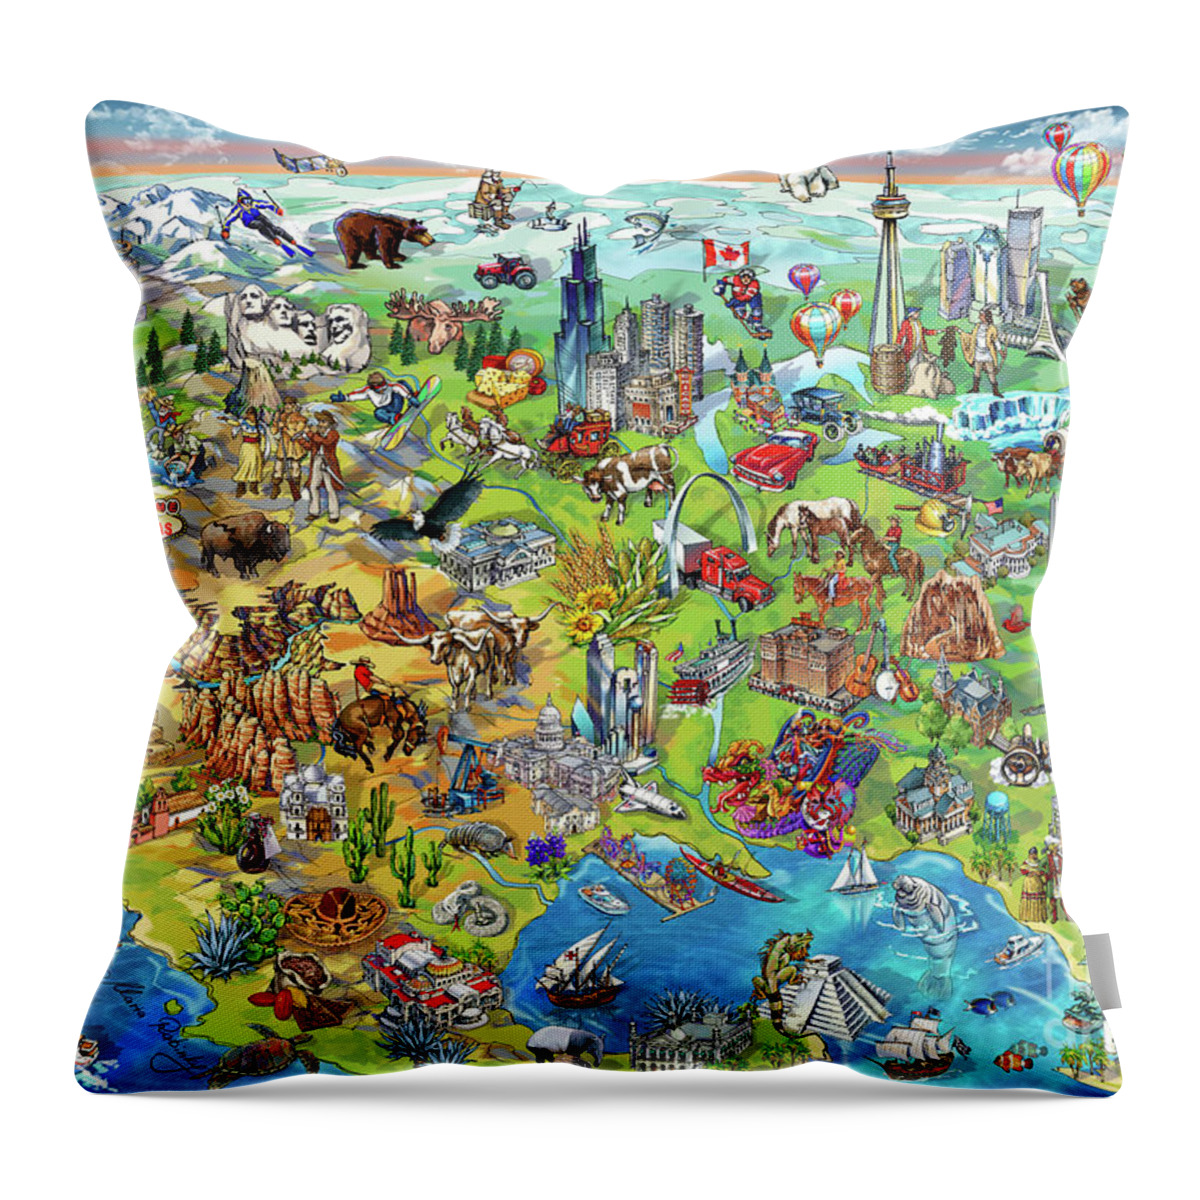 Los Angeles; Santa Barbara; Us; Usa; Maria Rabinky; Rabinky; New York; Illustrated Map; United States; Chicago; San Francisco; Pictorial Map; America; Colorful Map Of America Throw Pillow featuring the painting North America Wonders Map Illustration by Maria Rabinky